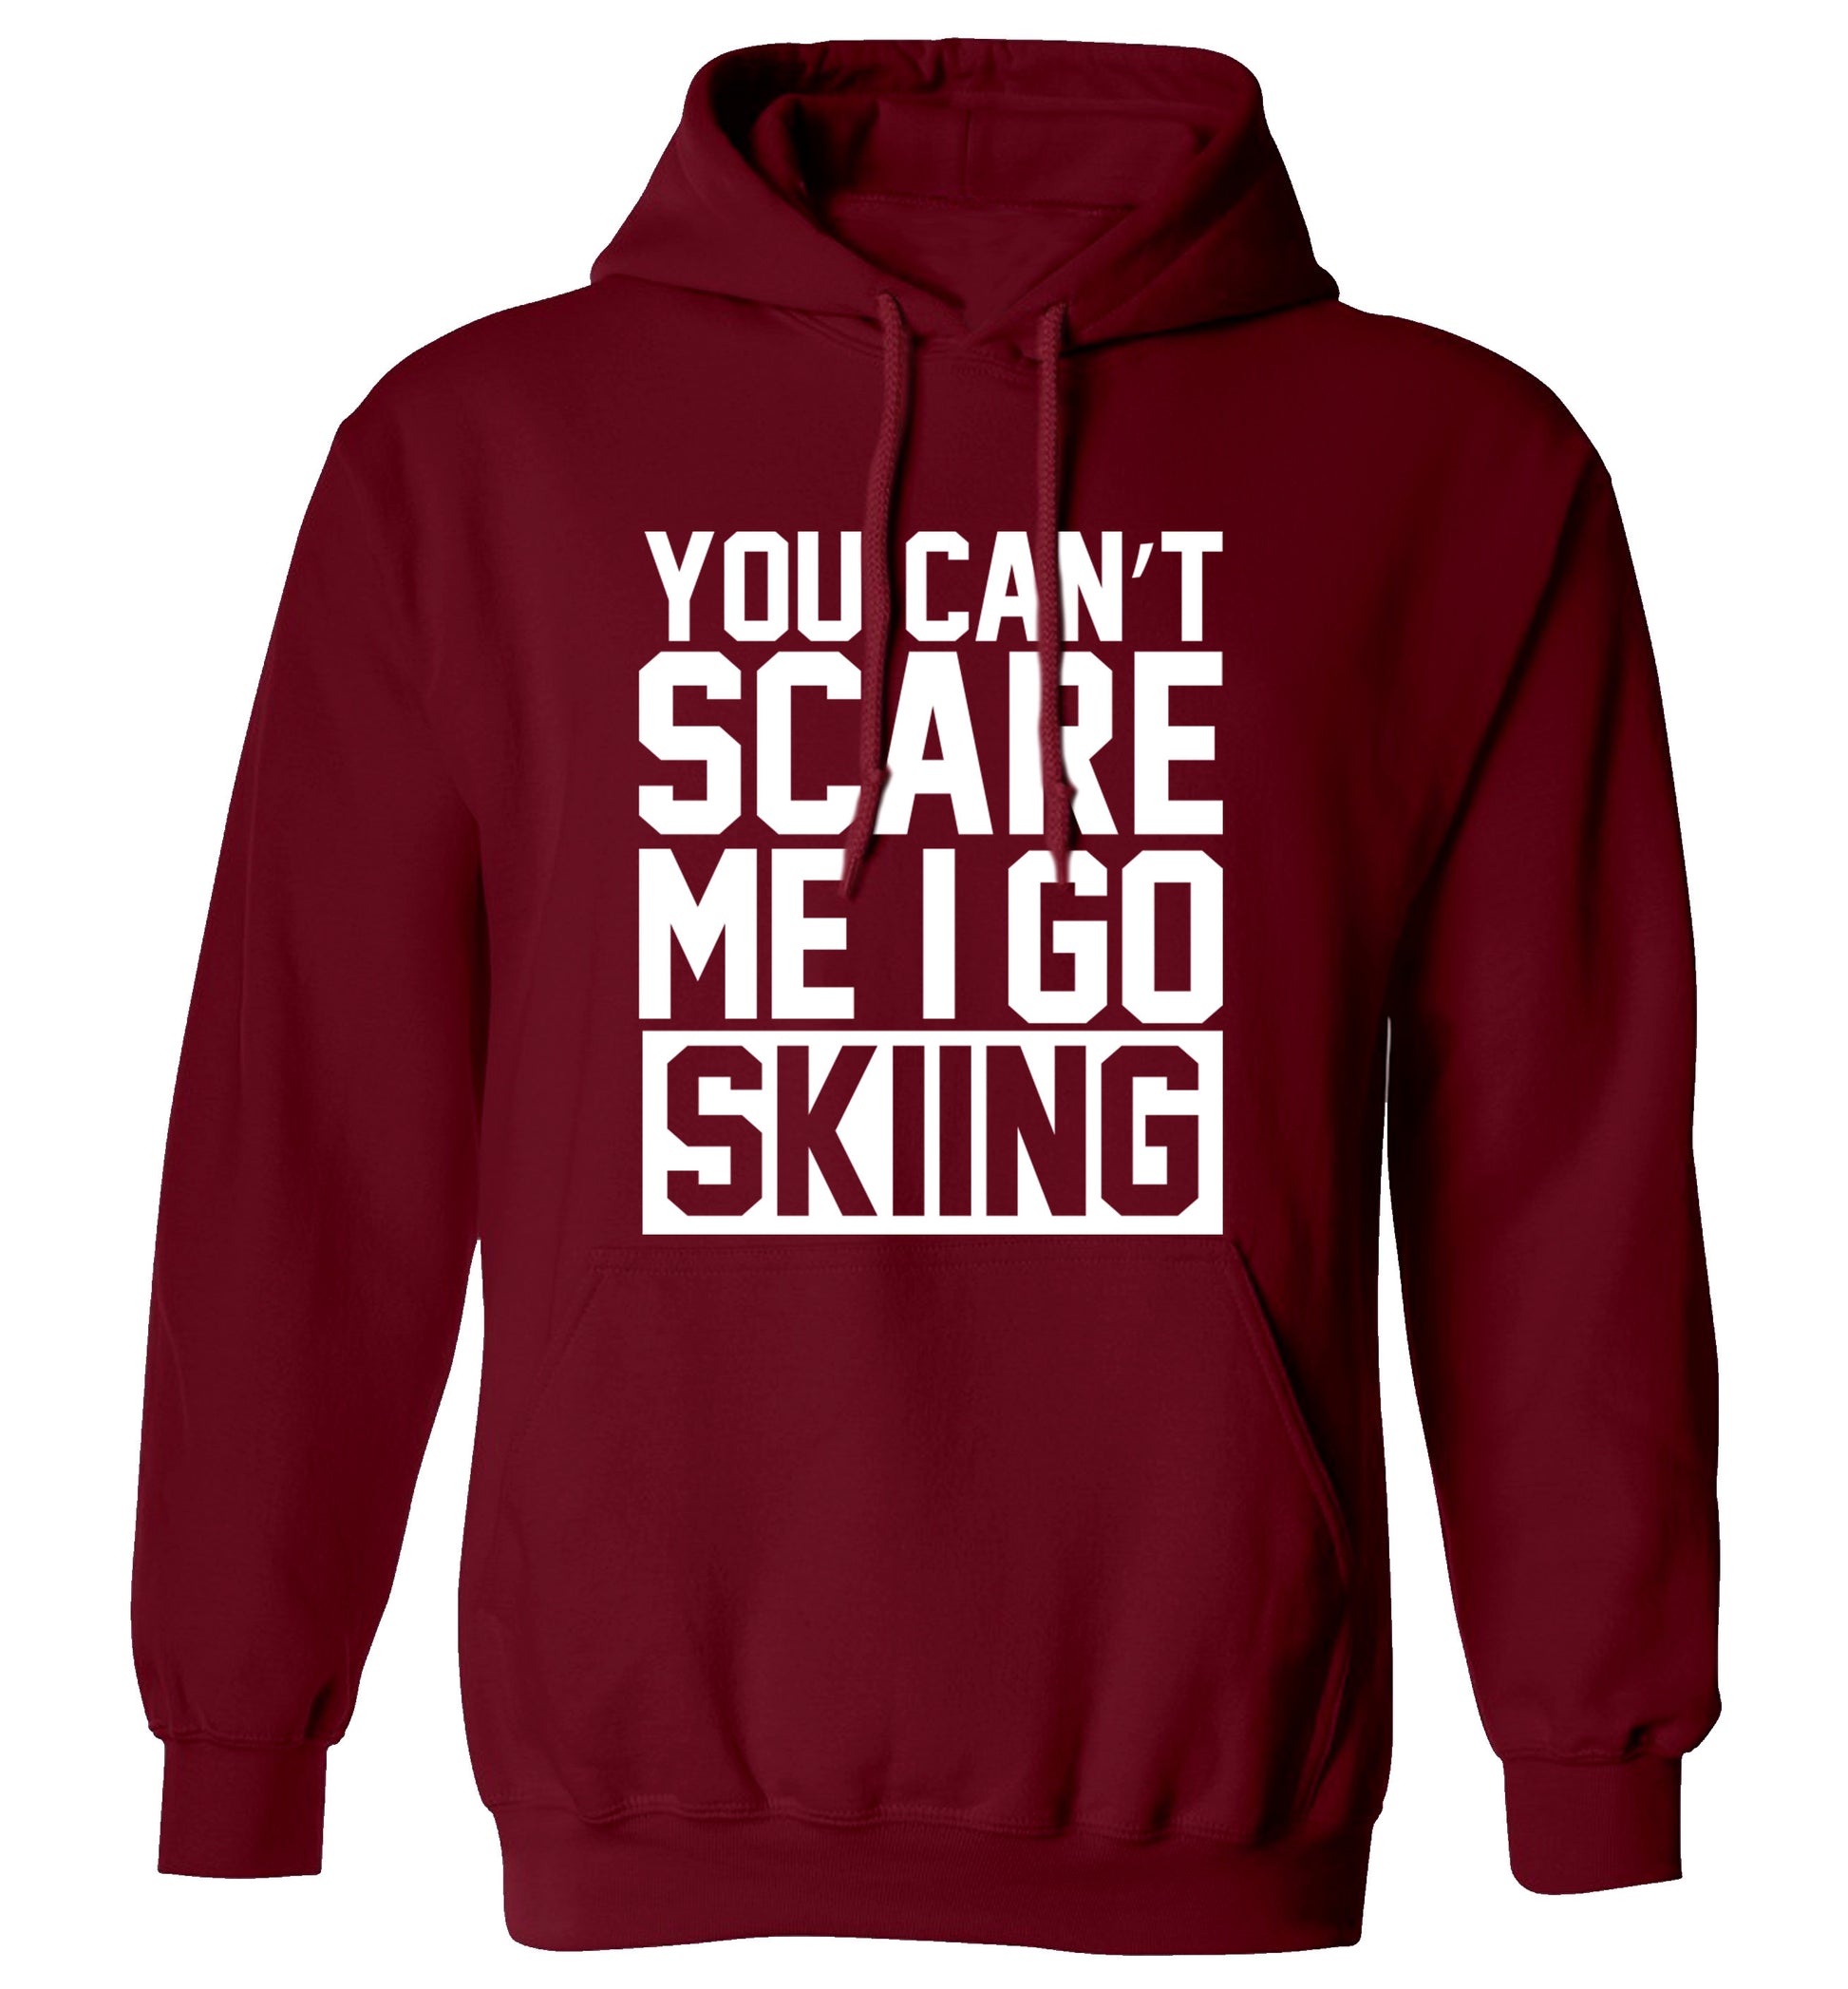 You can't scare me I go skiing adults unisex maroon hoodie 2XL